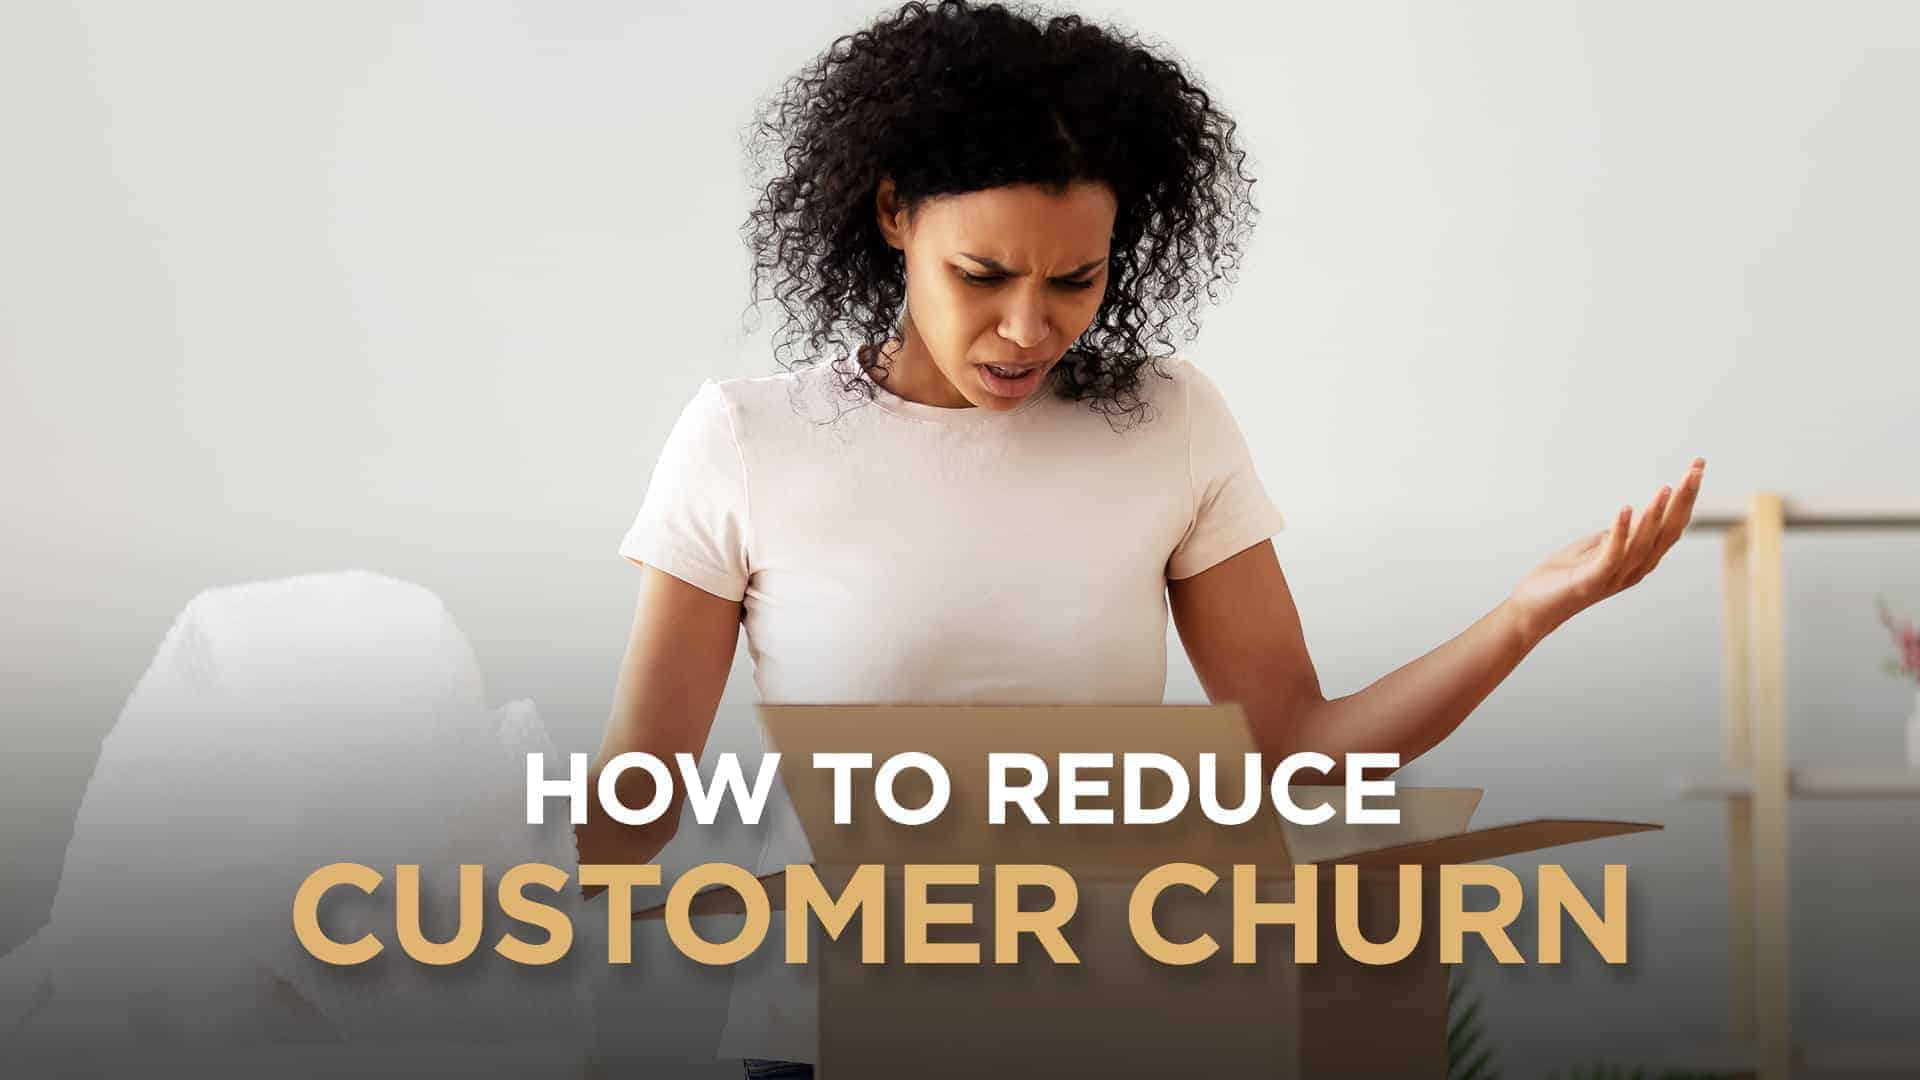 How To Reduce Customer Churn and Get More People To Care About Your Business